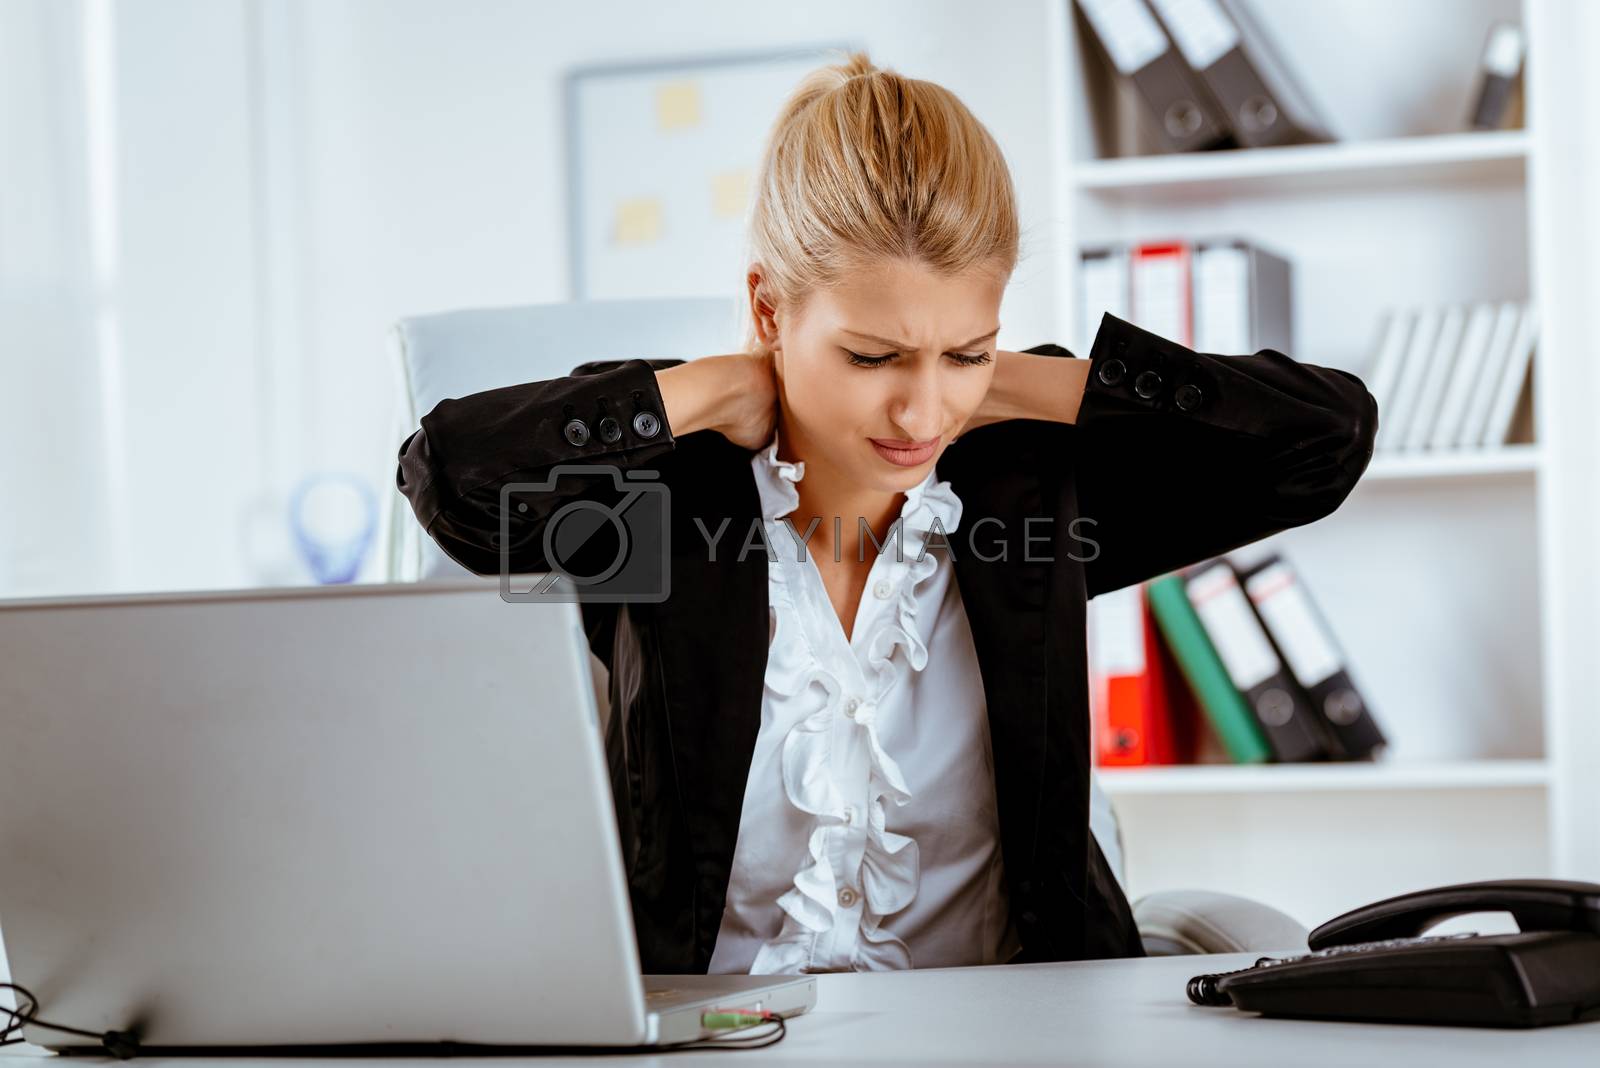 Royalty free image of Tired Businesswoman by MilanMarkovic78